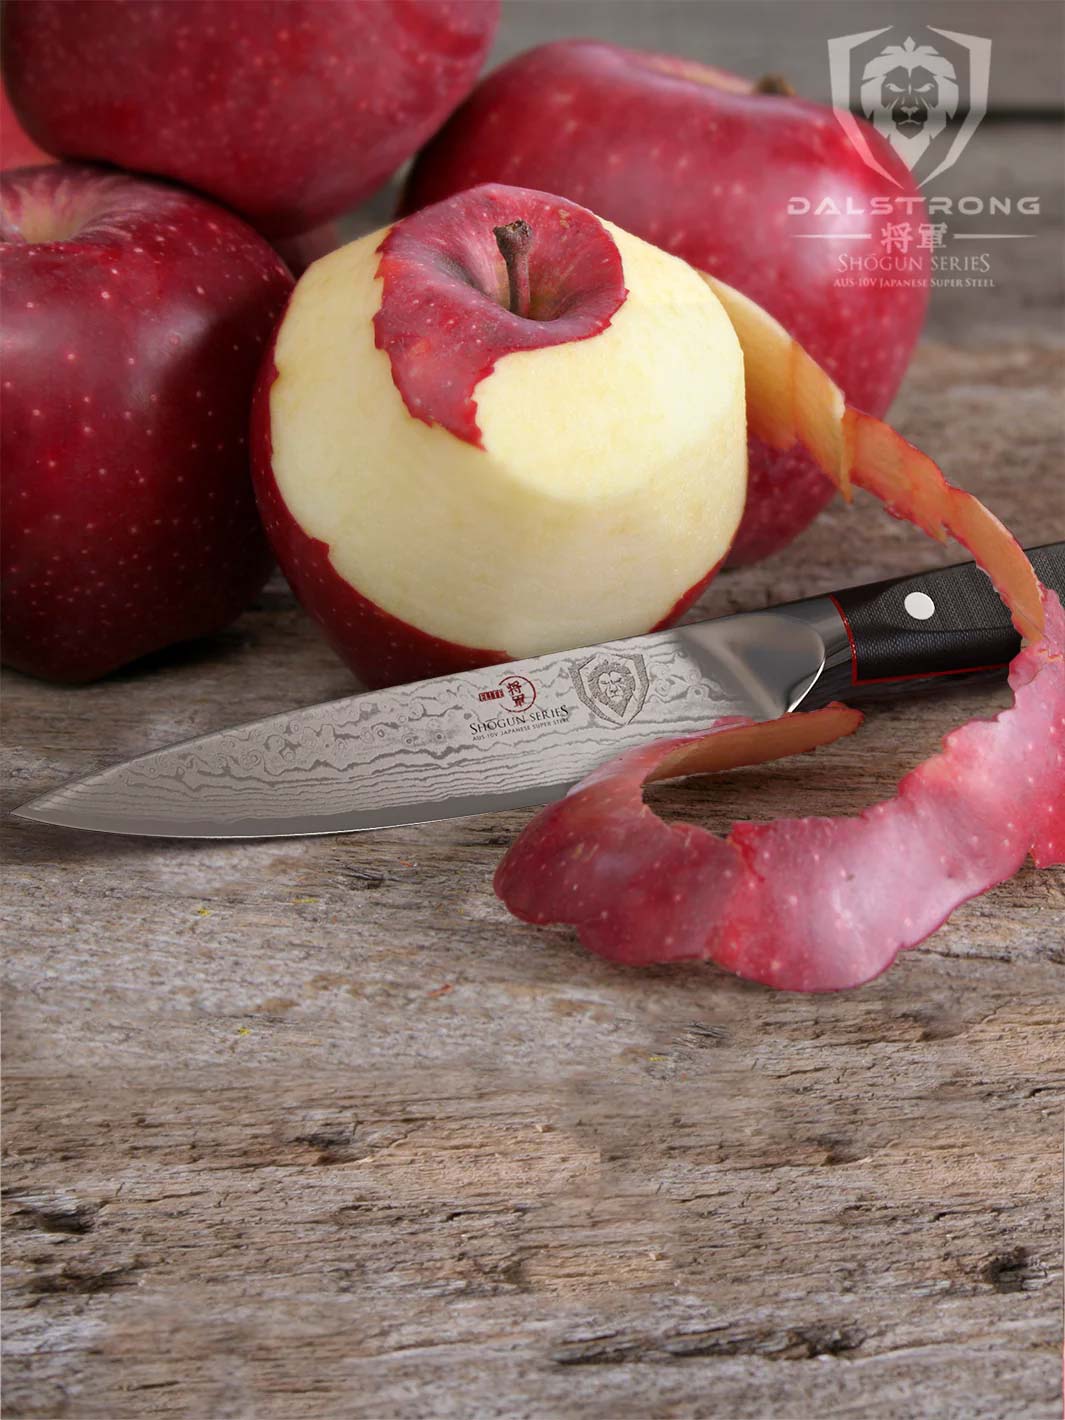 Dalstrong shogun series 3.5 inch paring knife with black handle and a peeled apple on a wooden table.